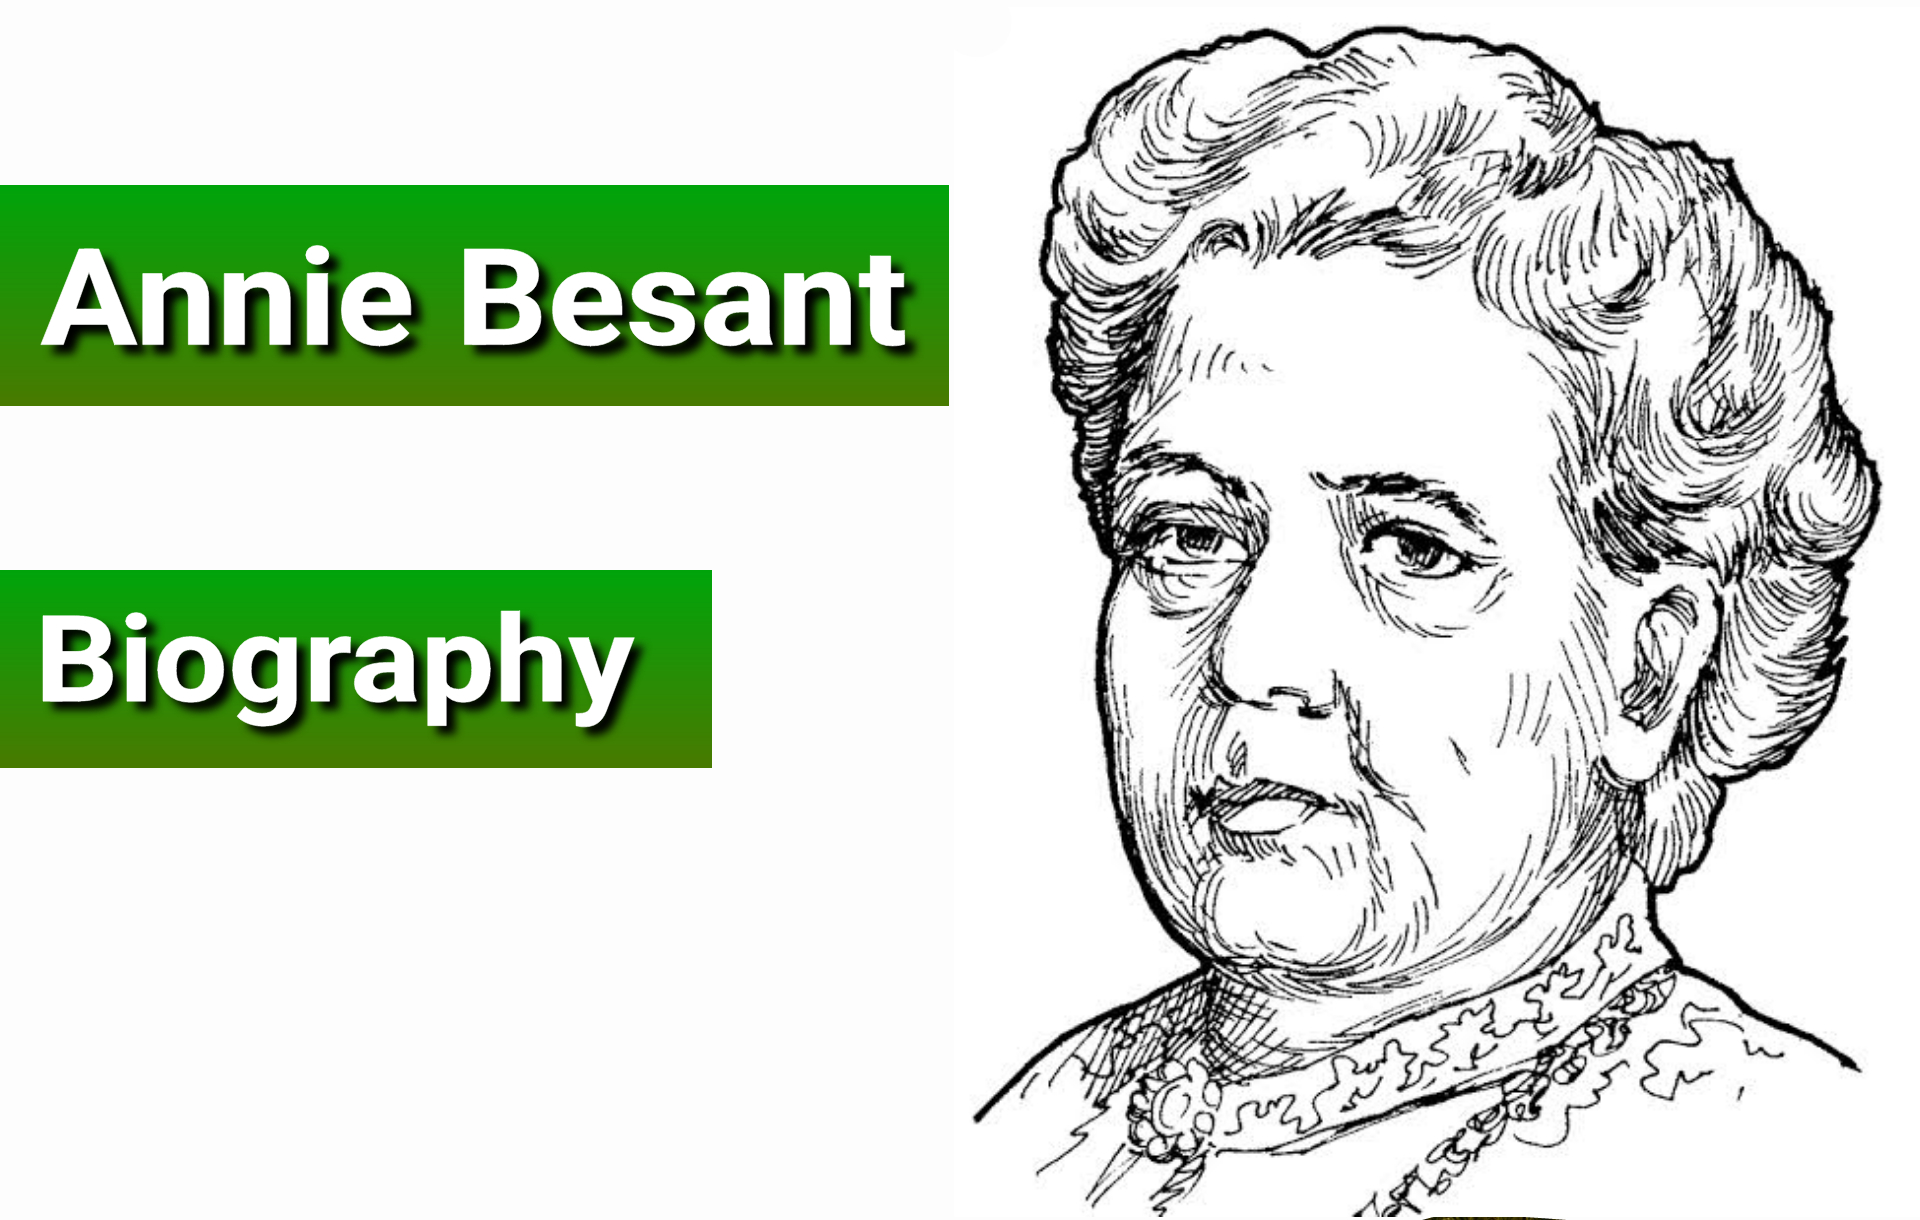 write a biography of annie besant within 100 words